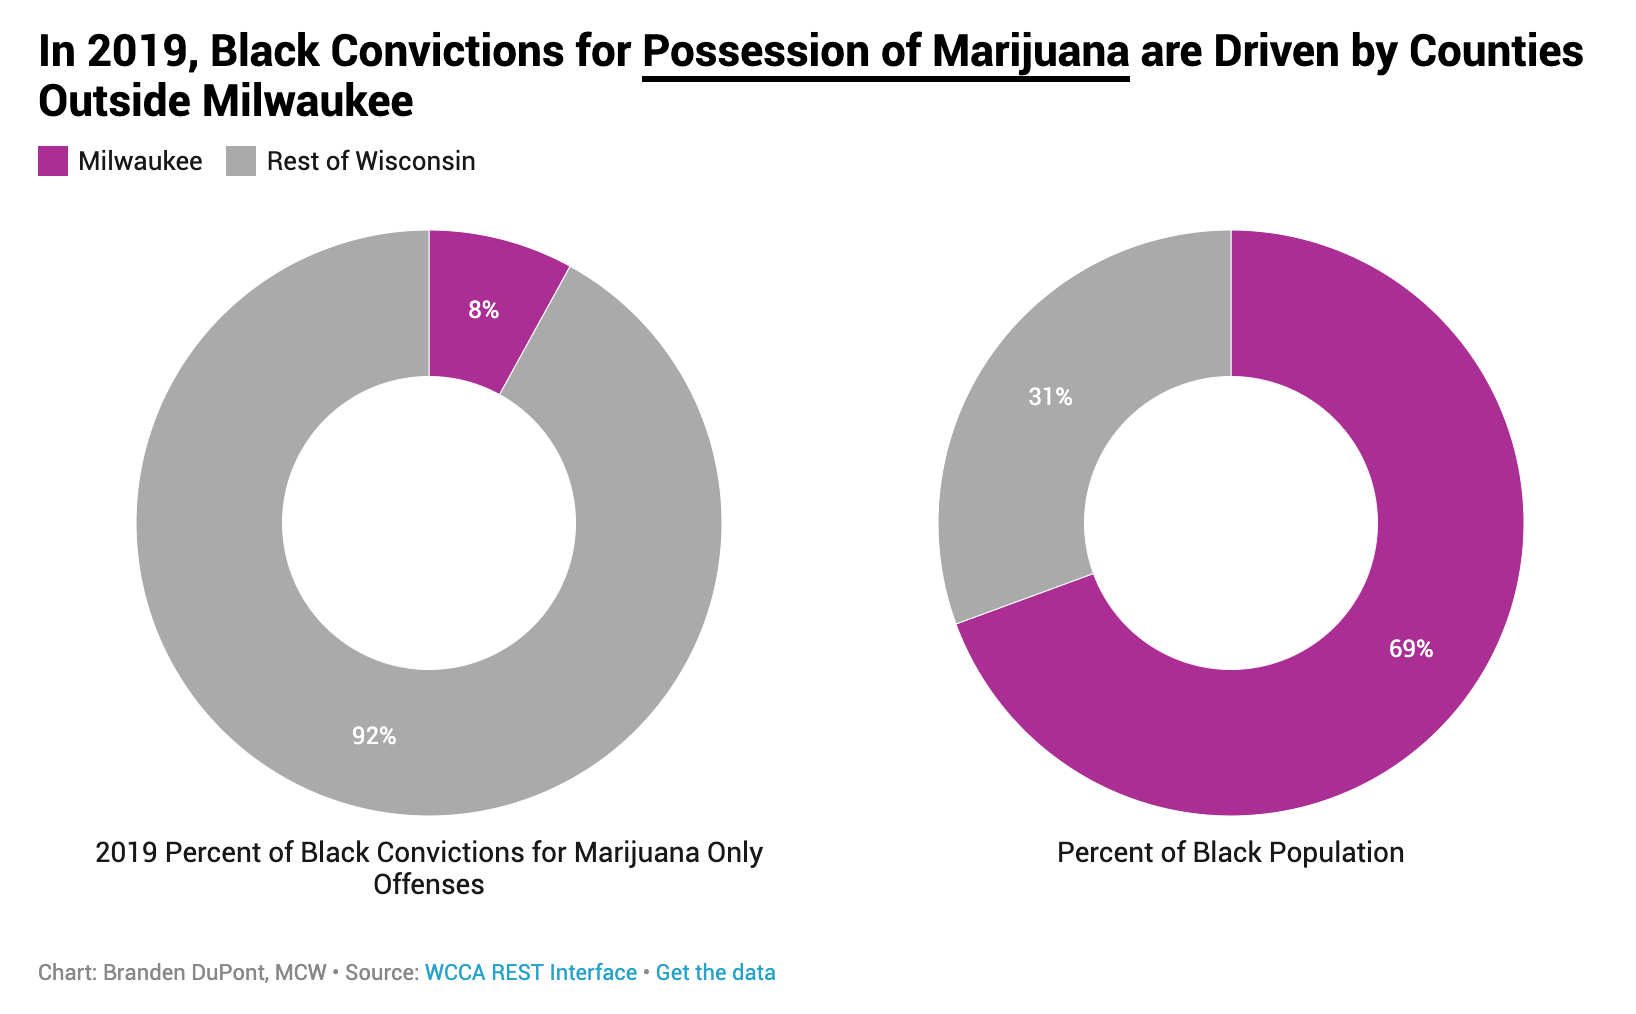 In 2019, Black convictions for possession of marijuana are driven by counties outside Milwaukee